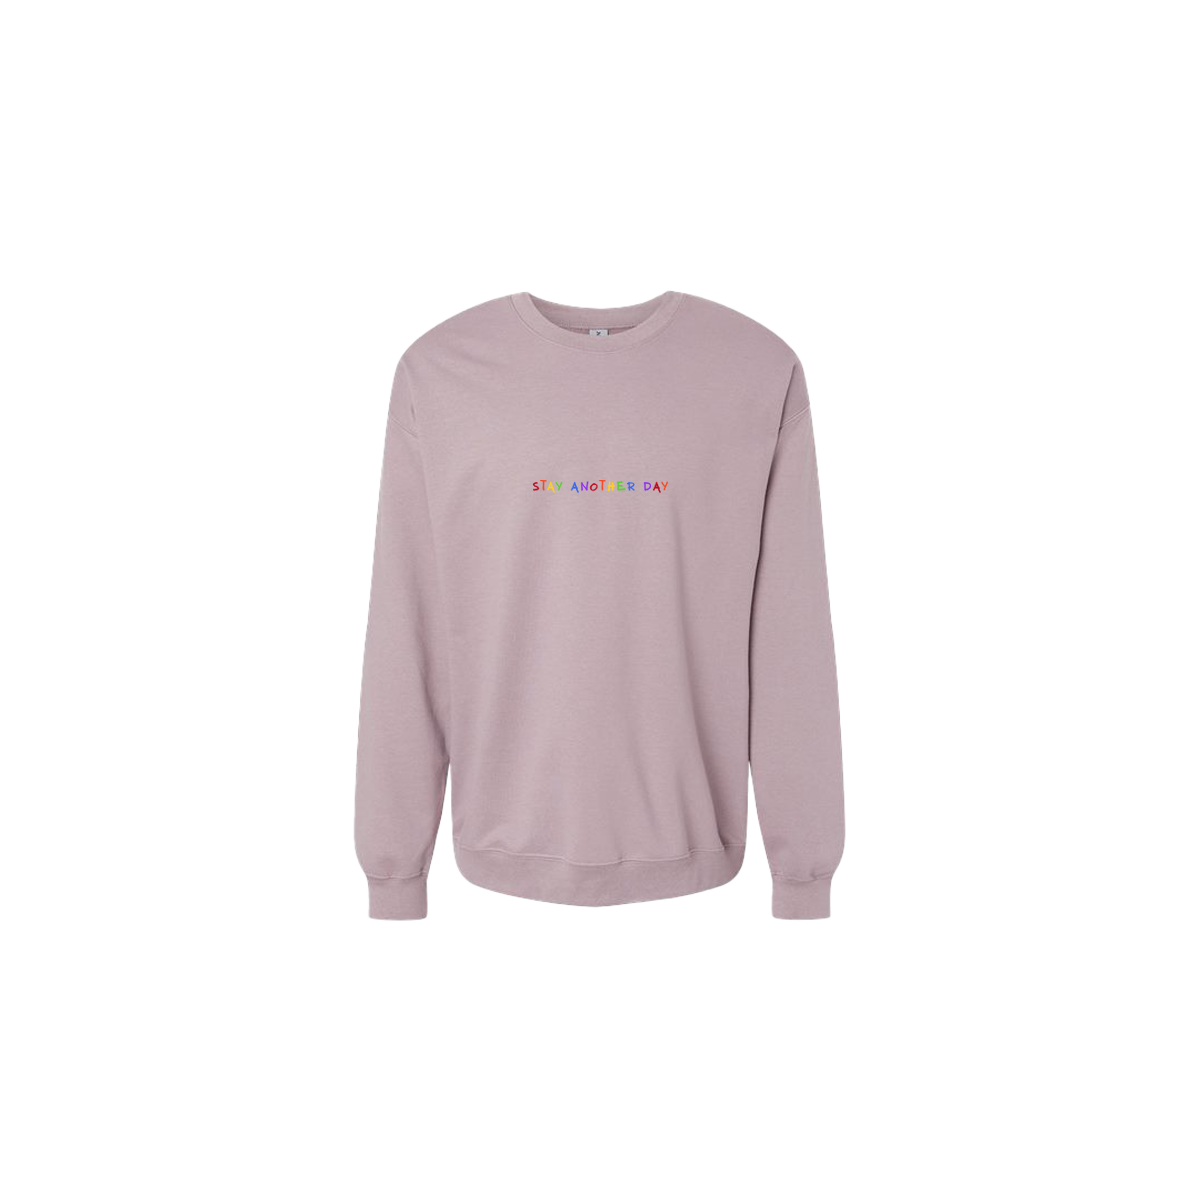 Stay Another Day Rainbow Embroidered Mauve Crewneck - Mental Health Awareness Clothing